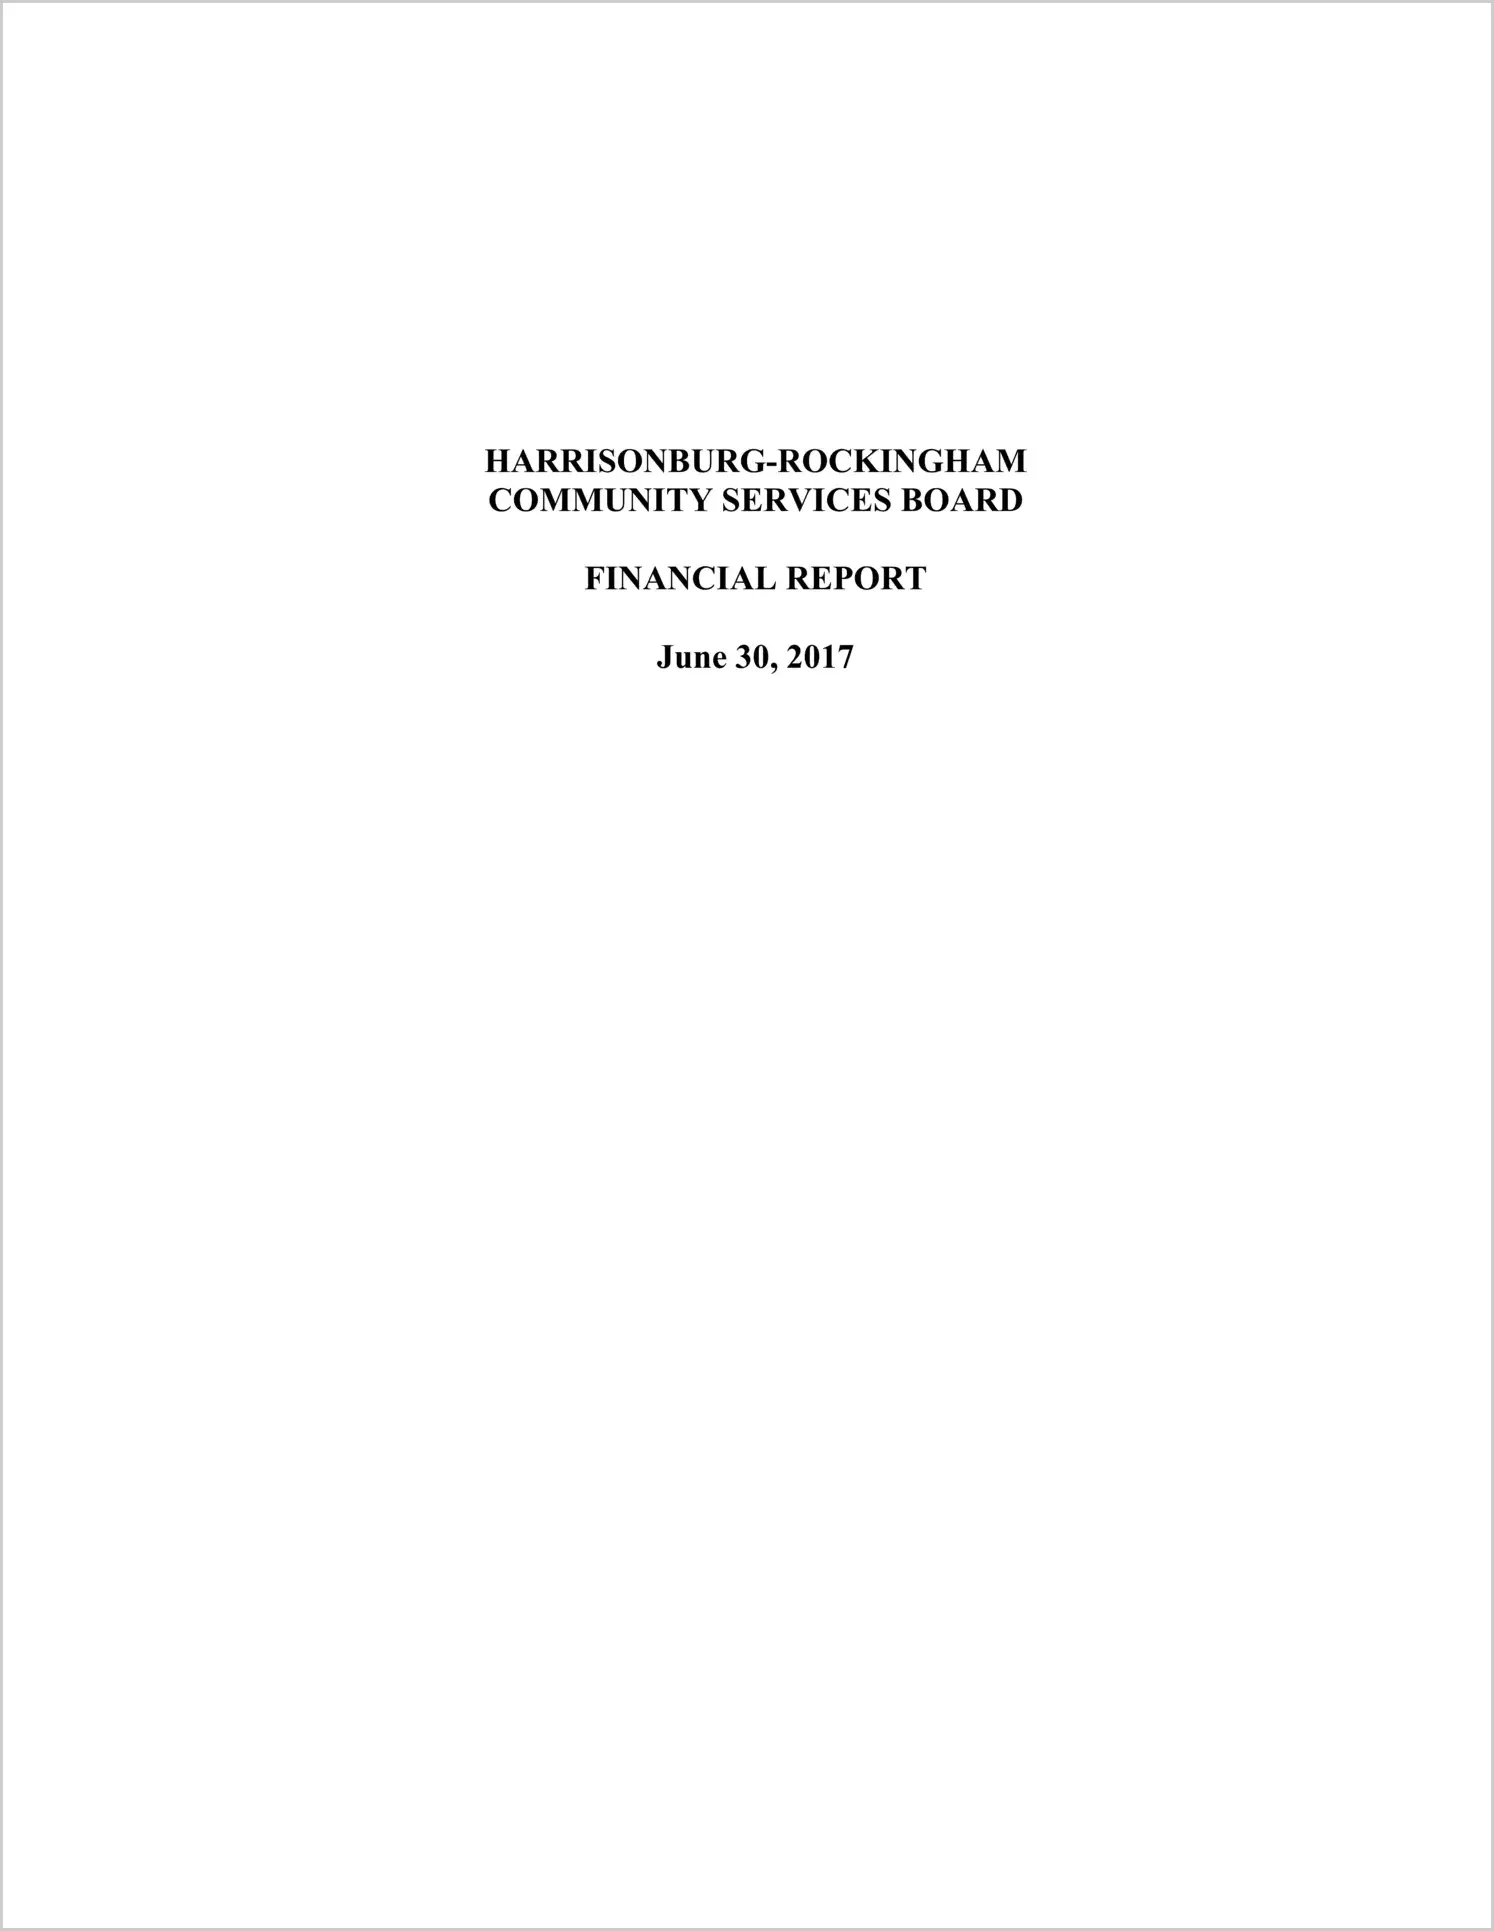 2017 ABC/Other Annual Financial Report  for Harrisonburg-Rockingham Community Services Board